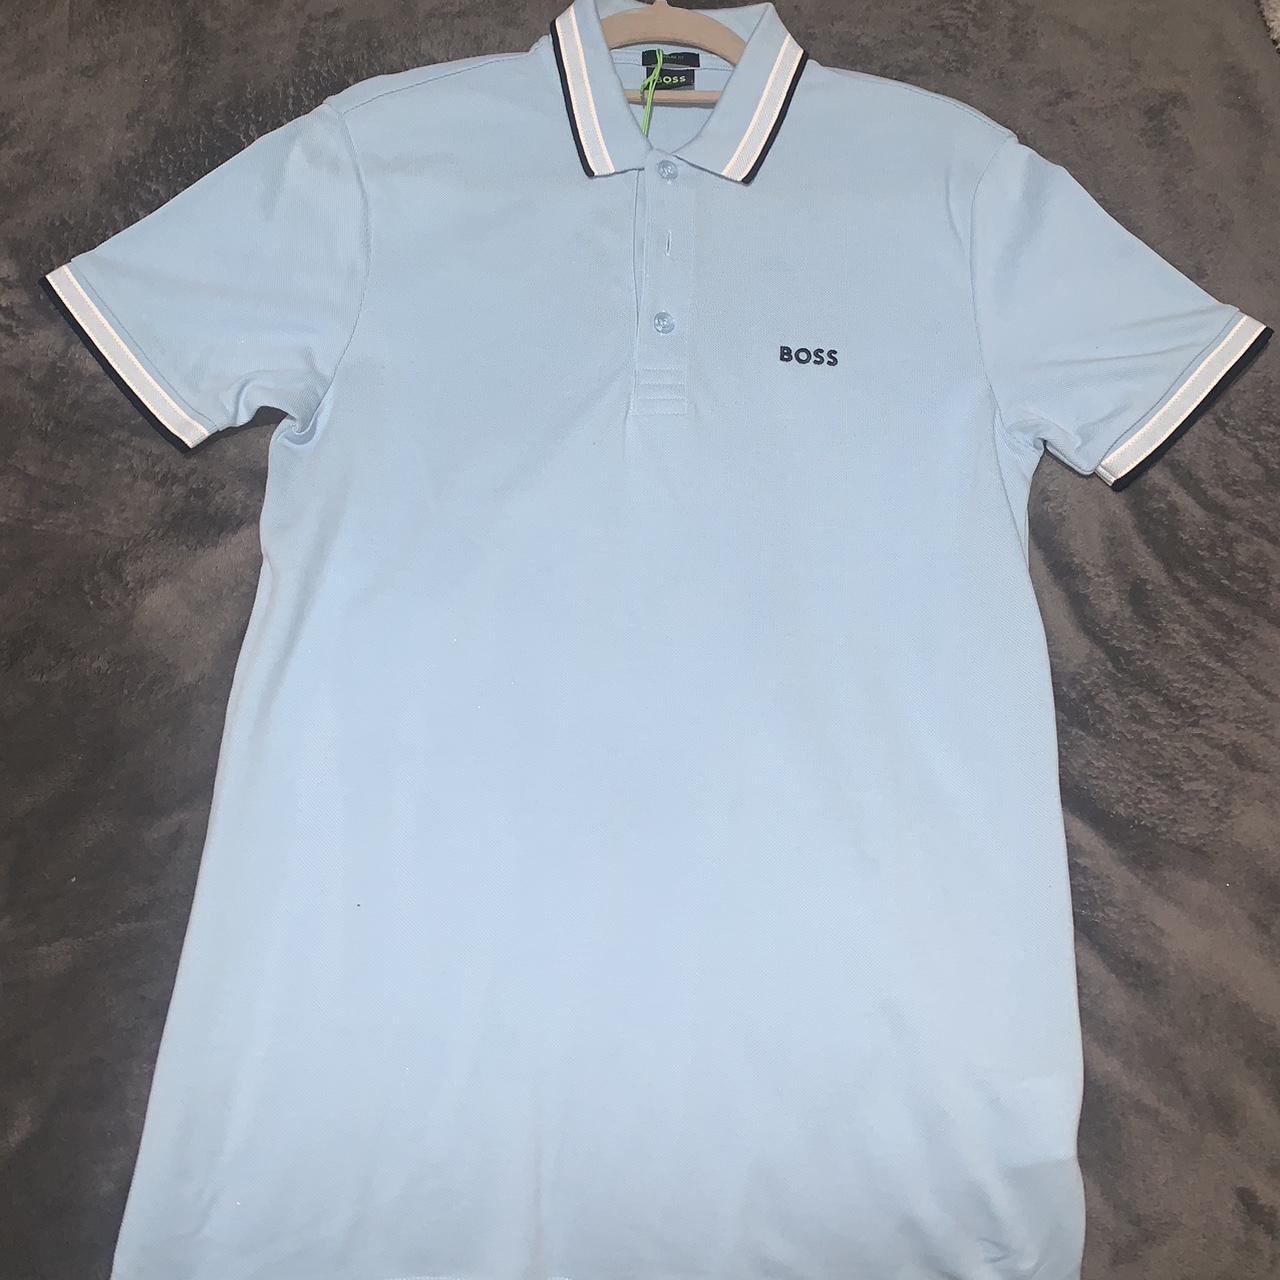 Hugo boss baby blue polo brand new with tags - Depop